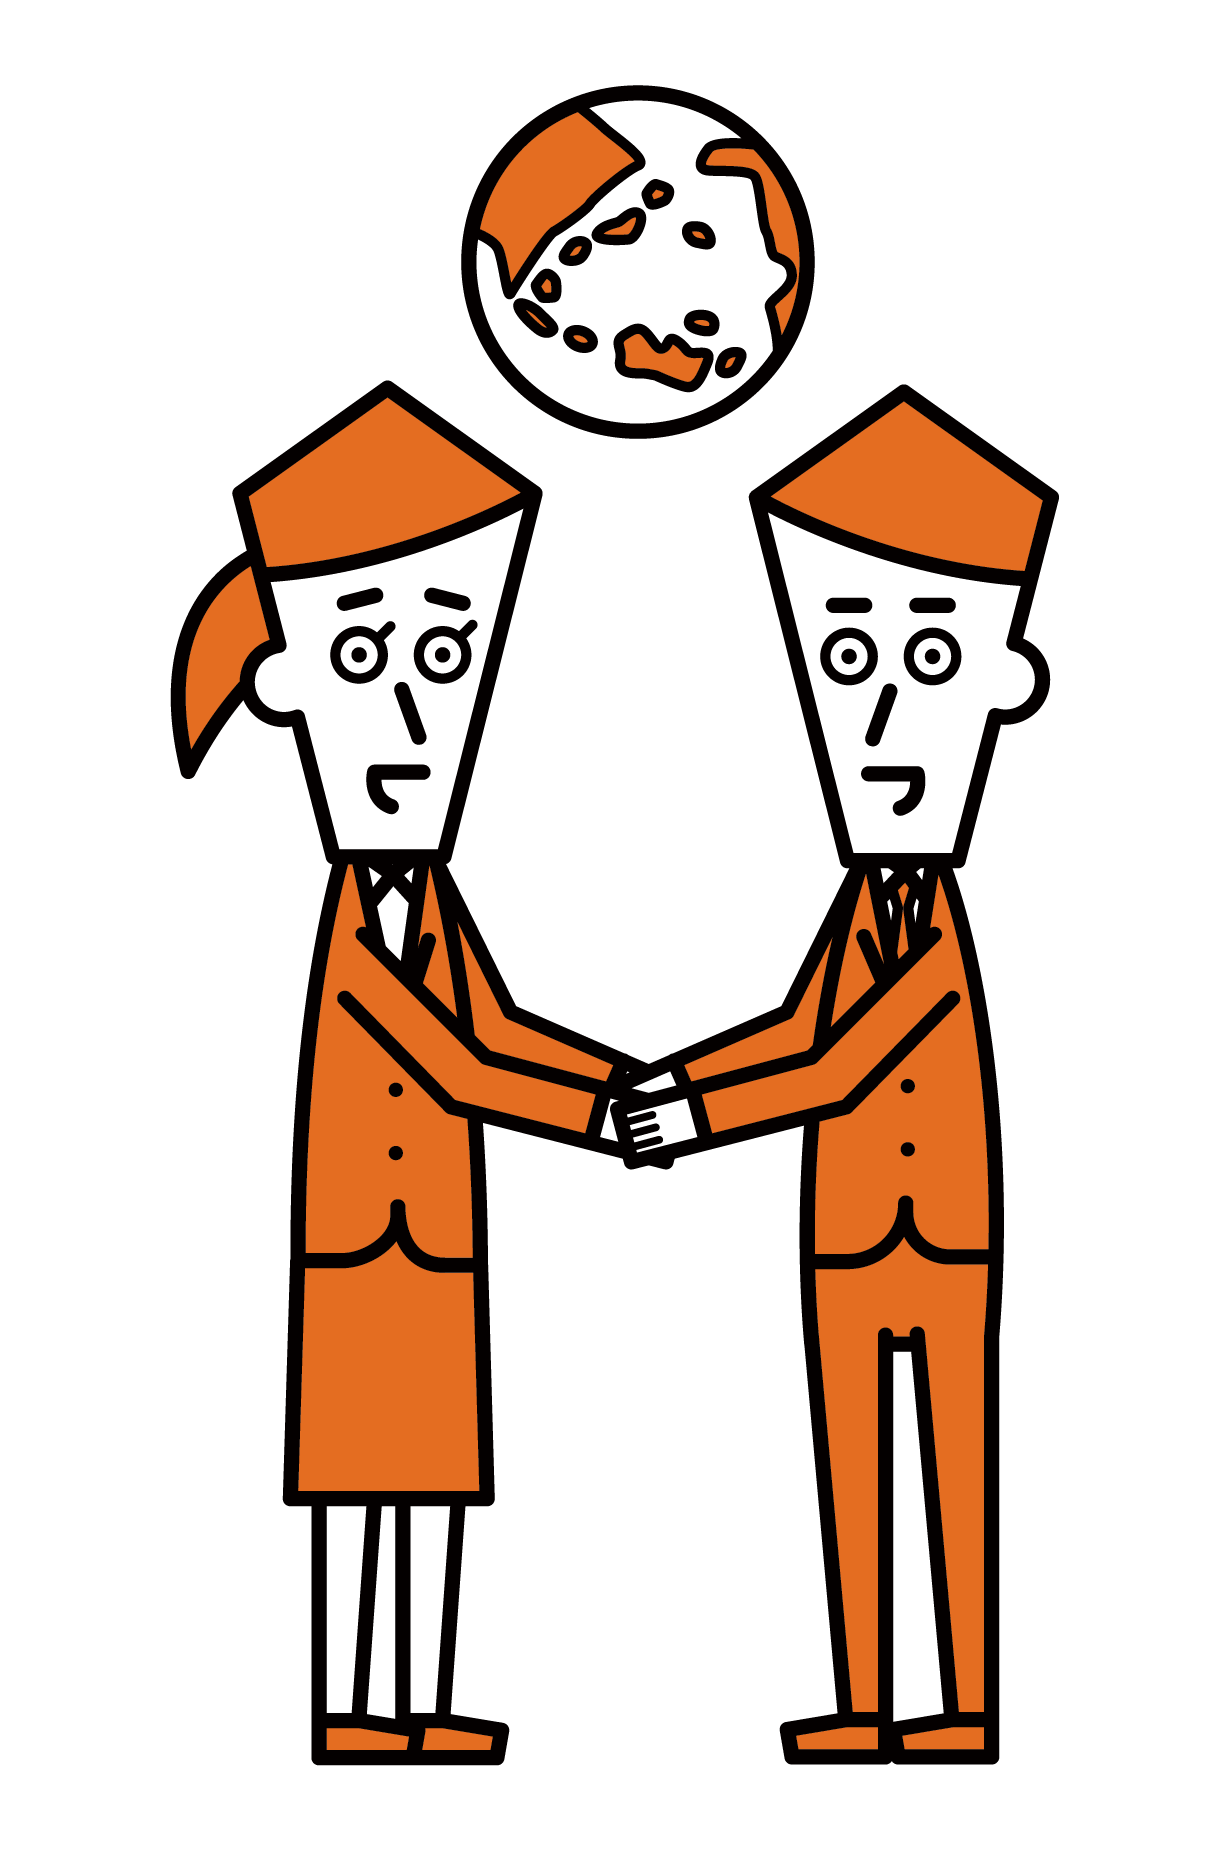 Illustration of diplomats and UNITED NATIONS officials